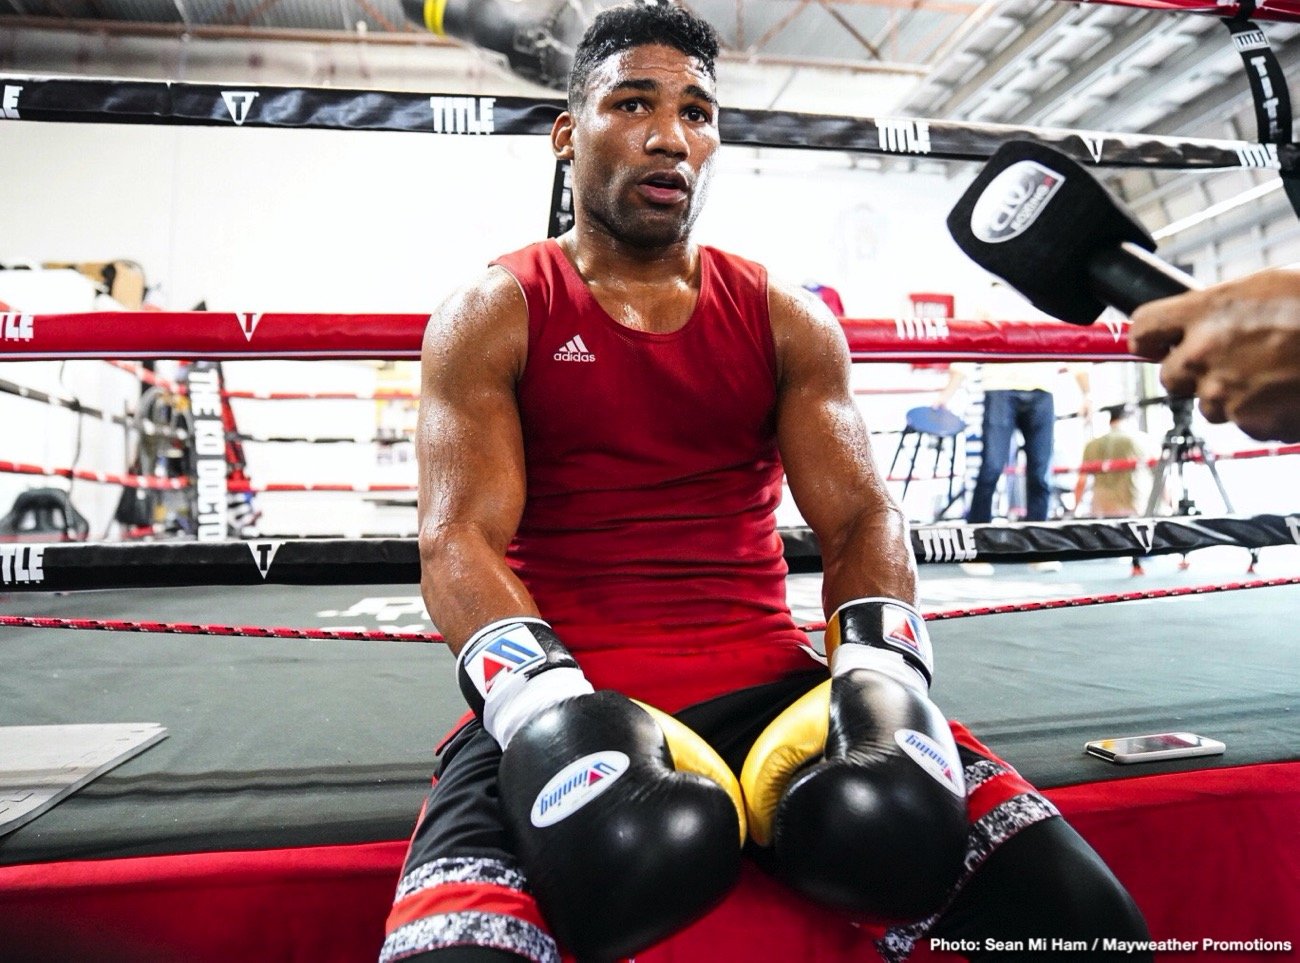 Yuriorkis Gamboa quotes for Gervonta Davis fight on Dec.28 on Showtime